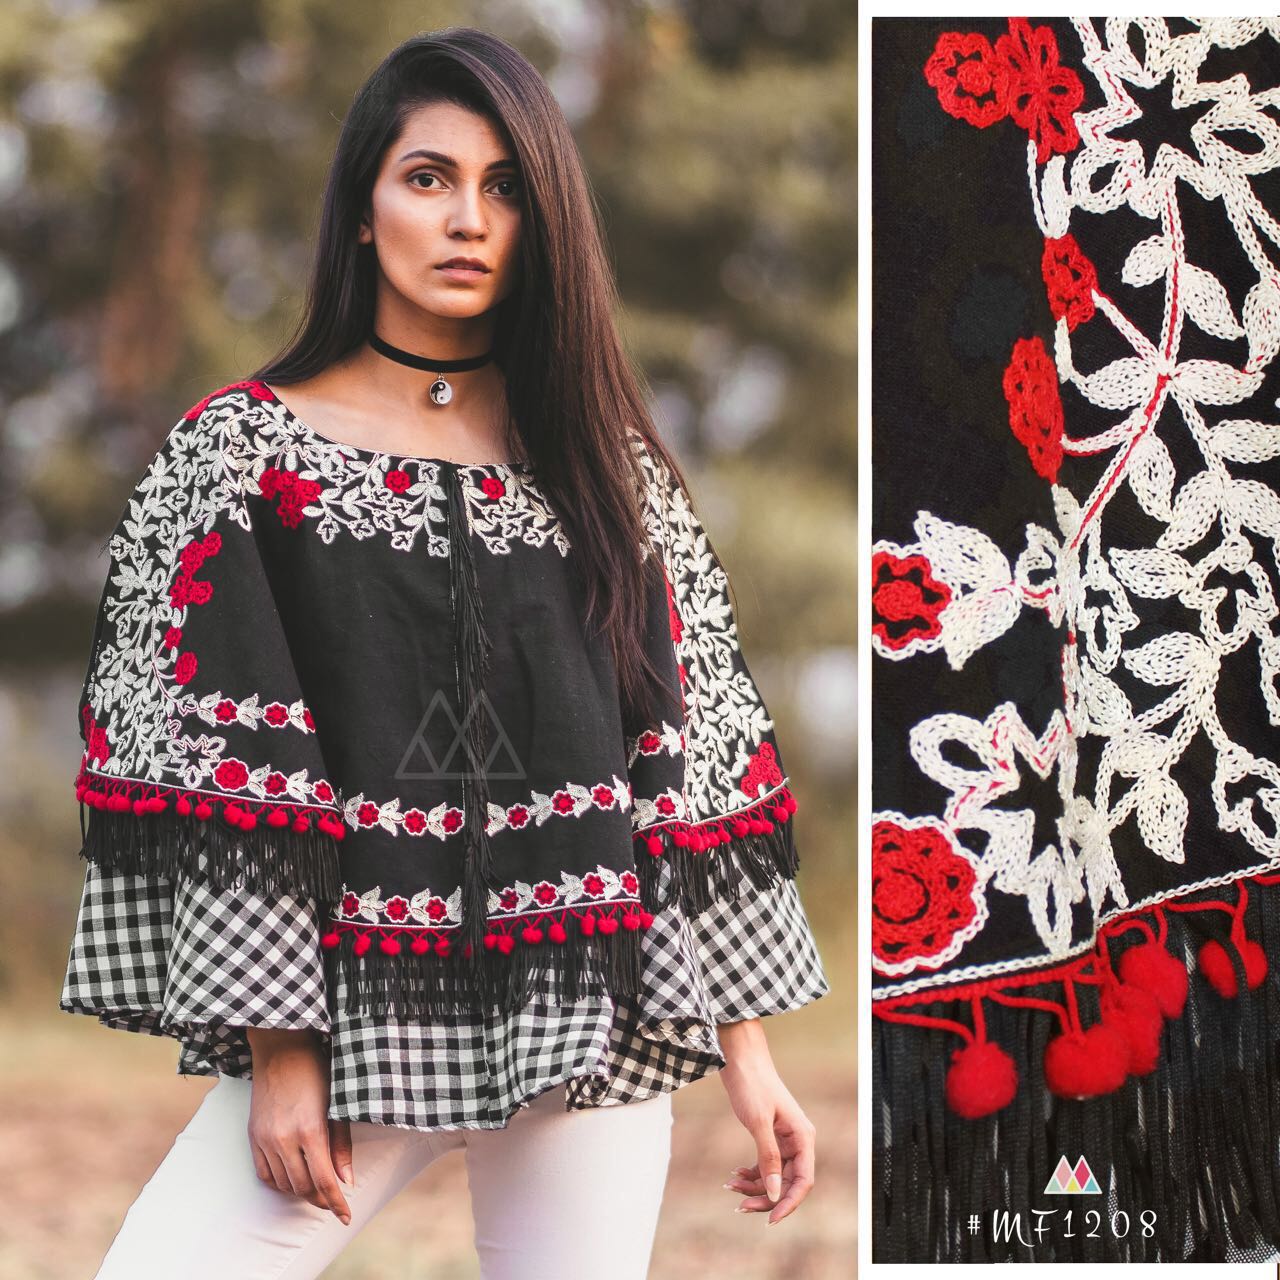 Khadi Ponchos Circular Ponchos With Front And Back Embroidery Singles Price â€“ 810/-